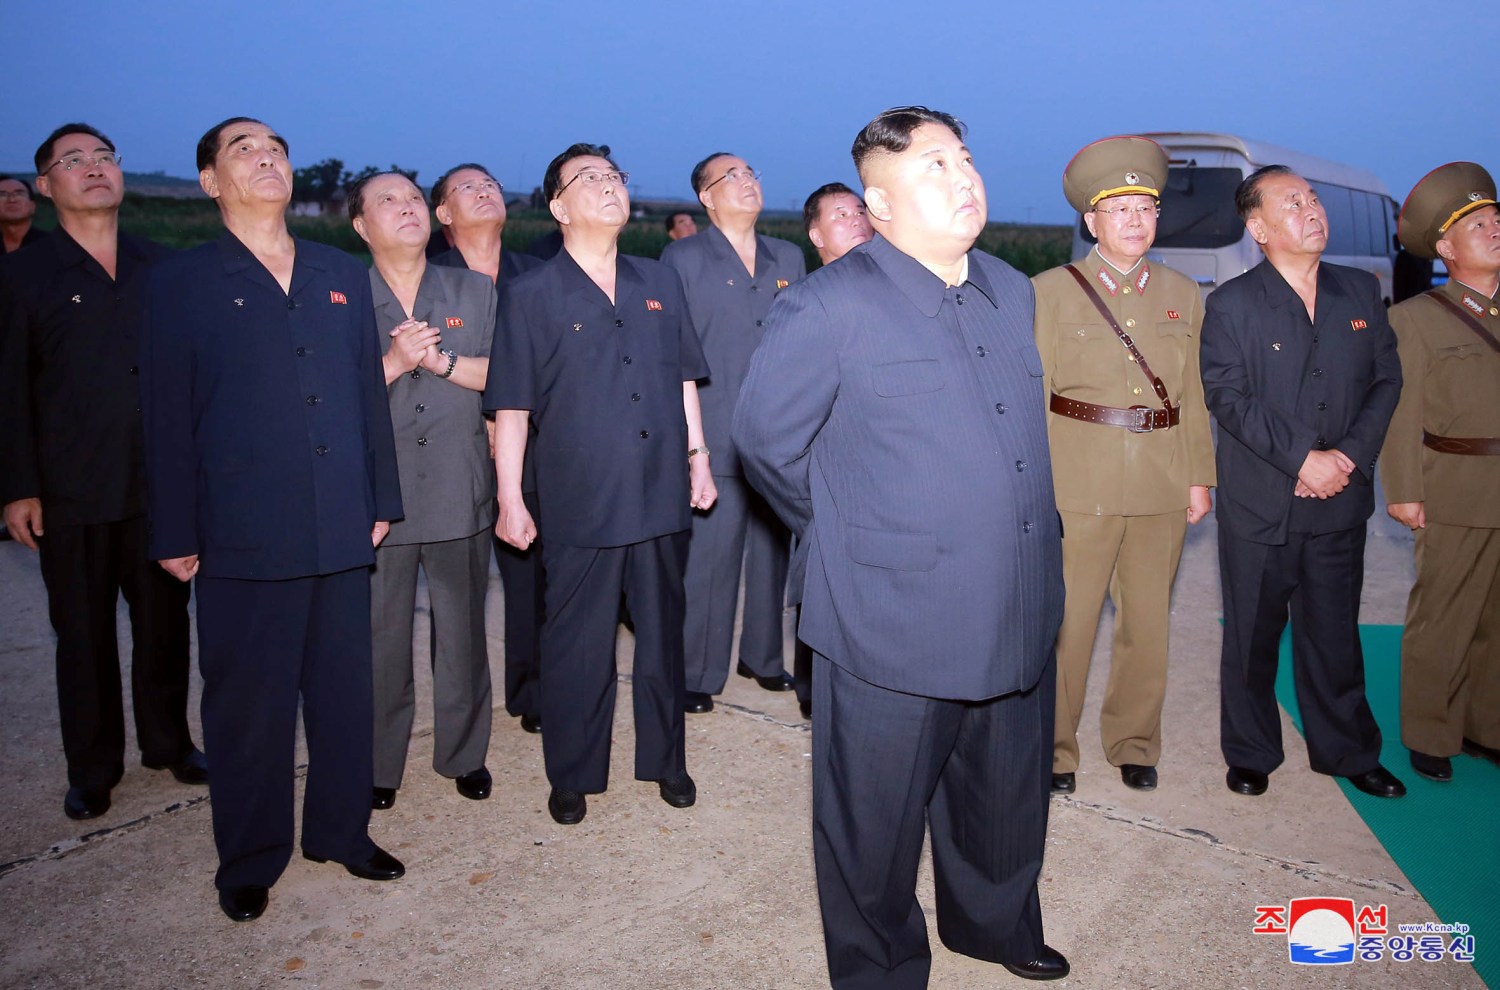 North Korean leader Kim Jong Un watches a missile launch at an unidentified location in North Korea, in this undated image provided by KCNA on August 7, 2019.  KCNA via REUTERS    ATTENTION EDITORS - THIS IMAGE WAS PROVIDED BY A THIRD PARTY. REUTERS IS UNABLE TO INDEPENDENTLY VERIFY THIS IMAGE. NO THIRD PARTY SALES. SOUTH KOREA OUT. NO COMMERCIAL OR EDITORIAL SALES IN SOUTH KOREA. - RC1C228C97D0